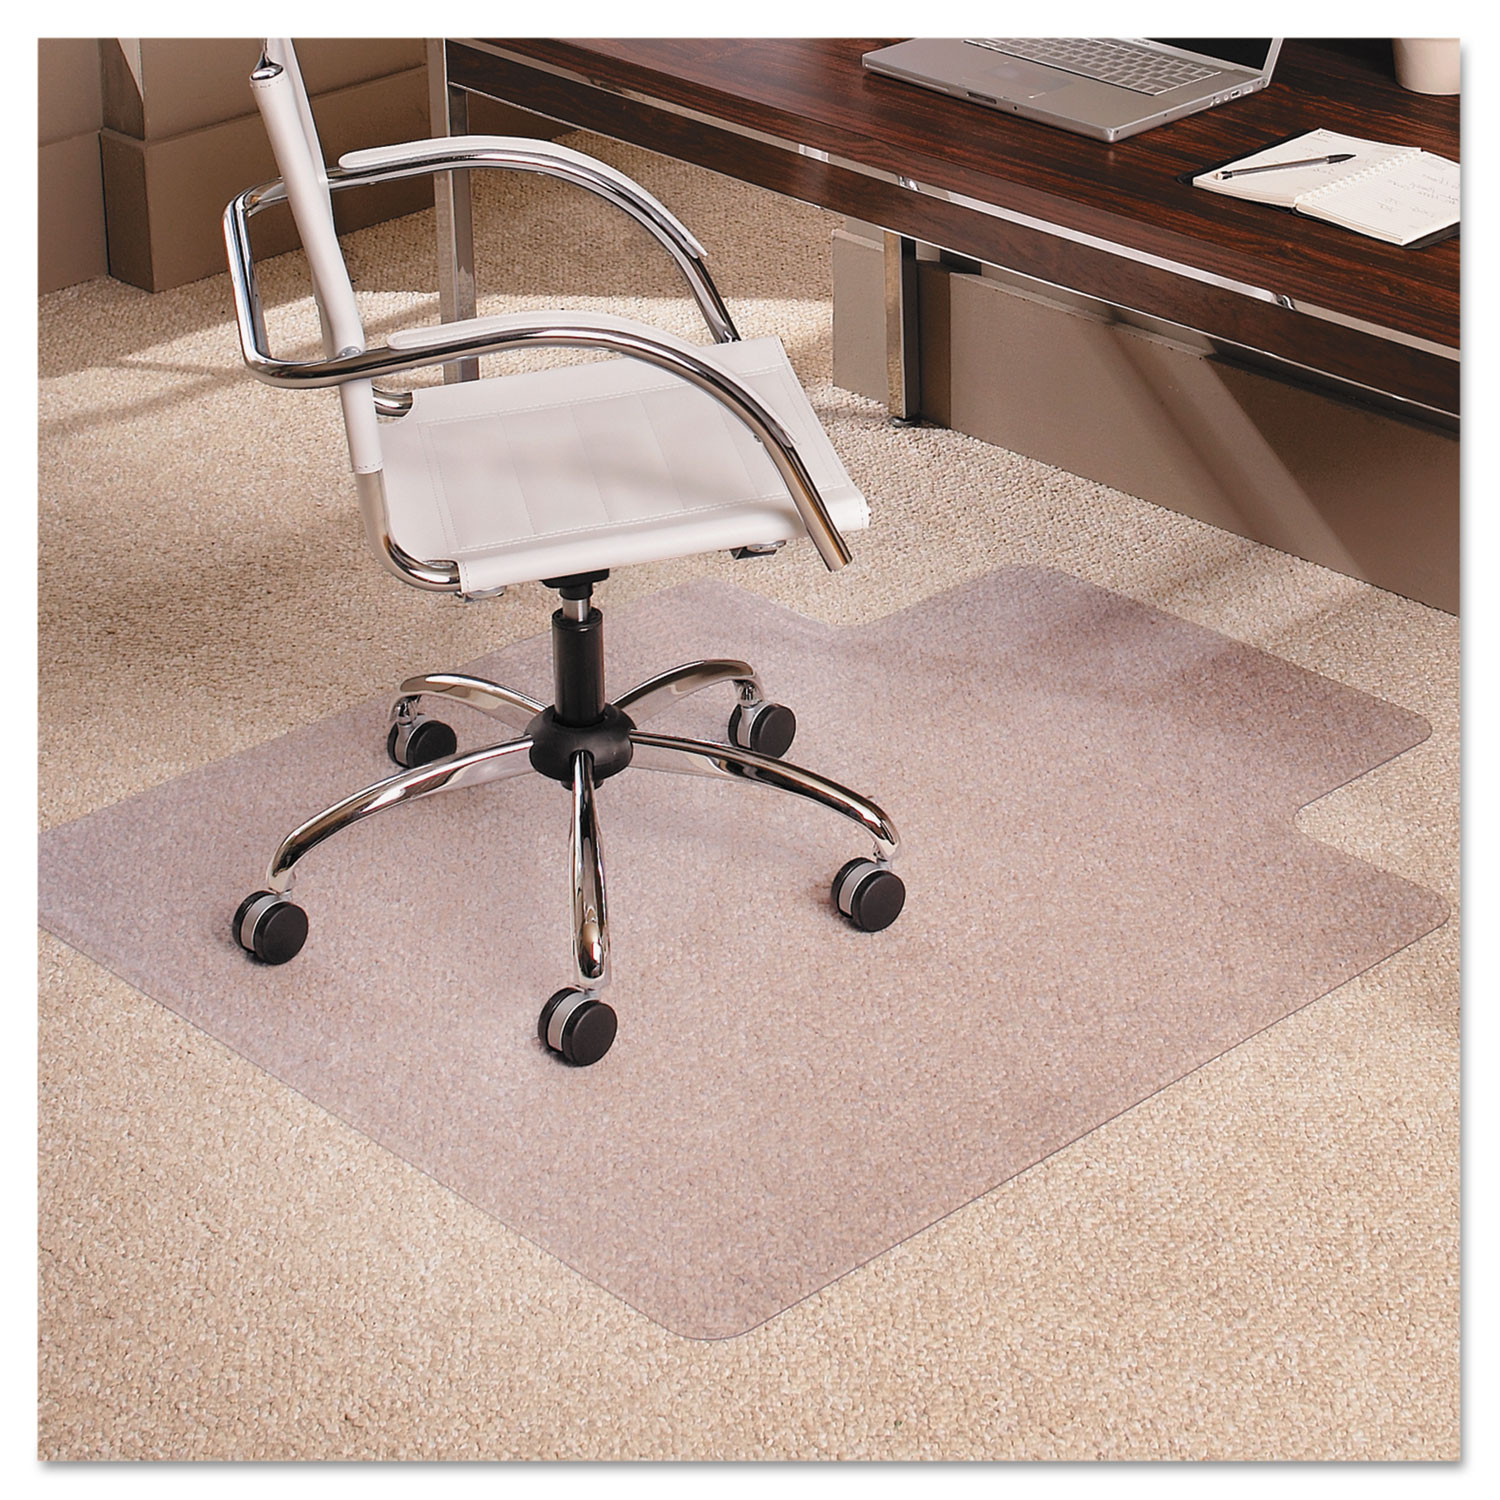 45x53 Lip Chair Mat, Multi-Task Series AnchorBar for Carpet up to 3/8